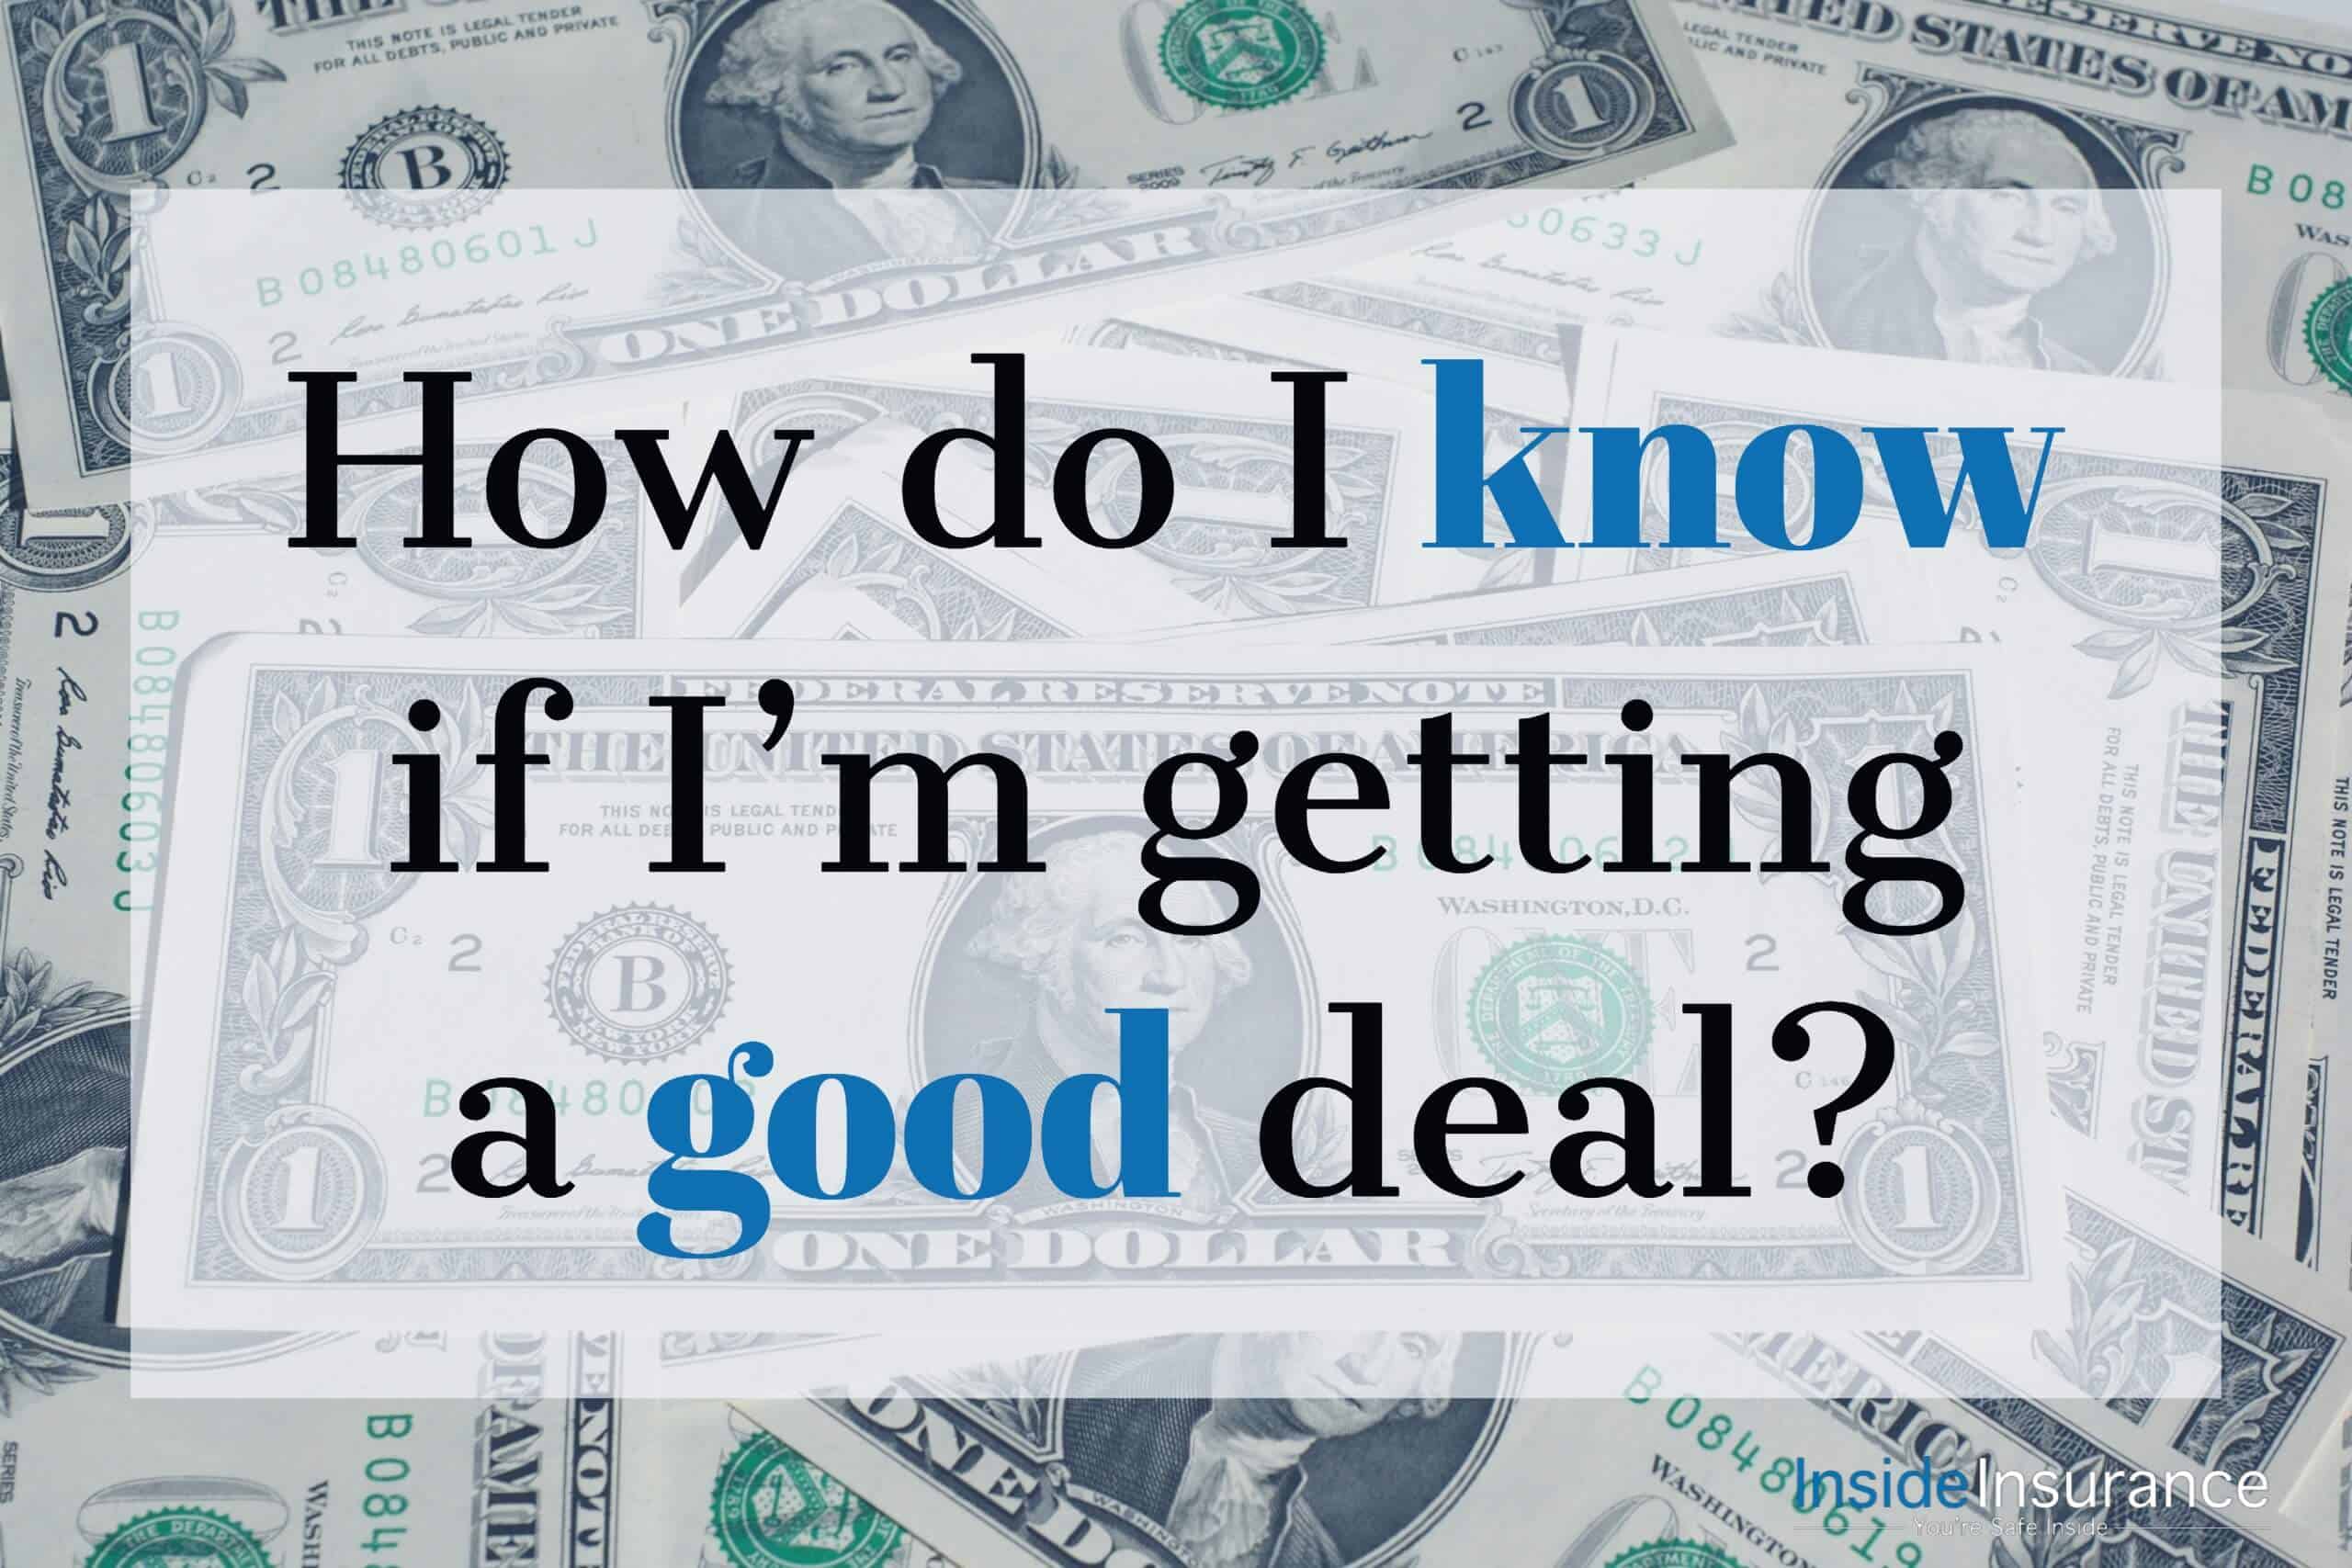 alt="Dollar bills picture on the background with a note that says 'How do I know if I'm getting a good deal'."."